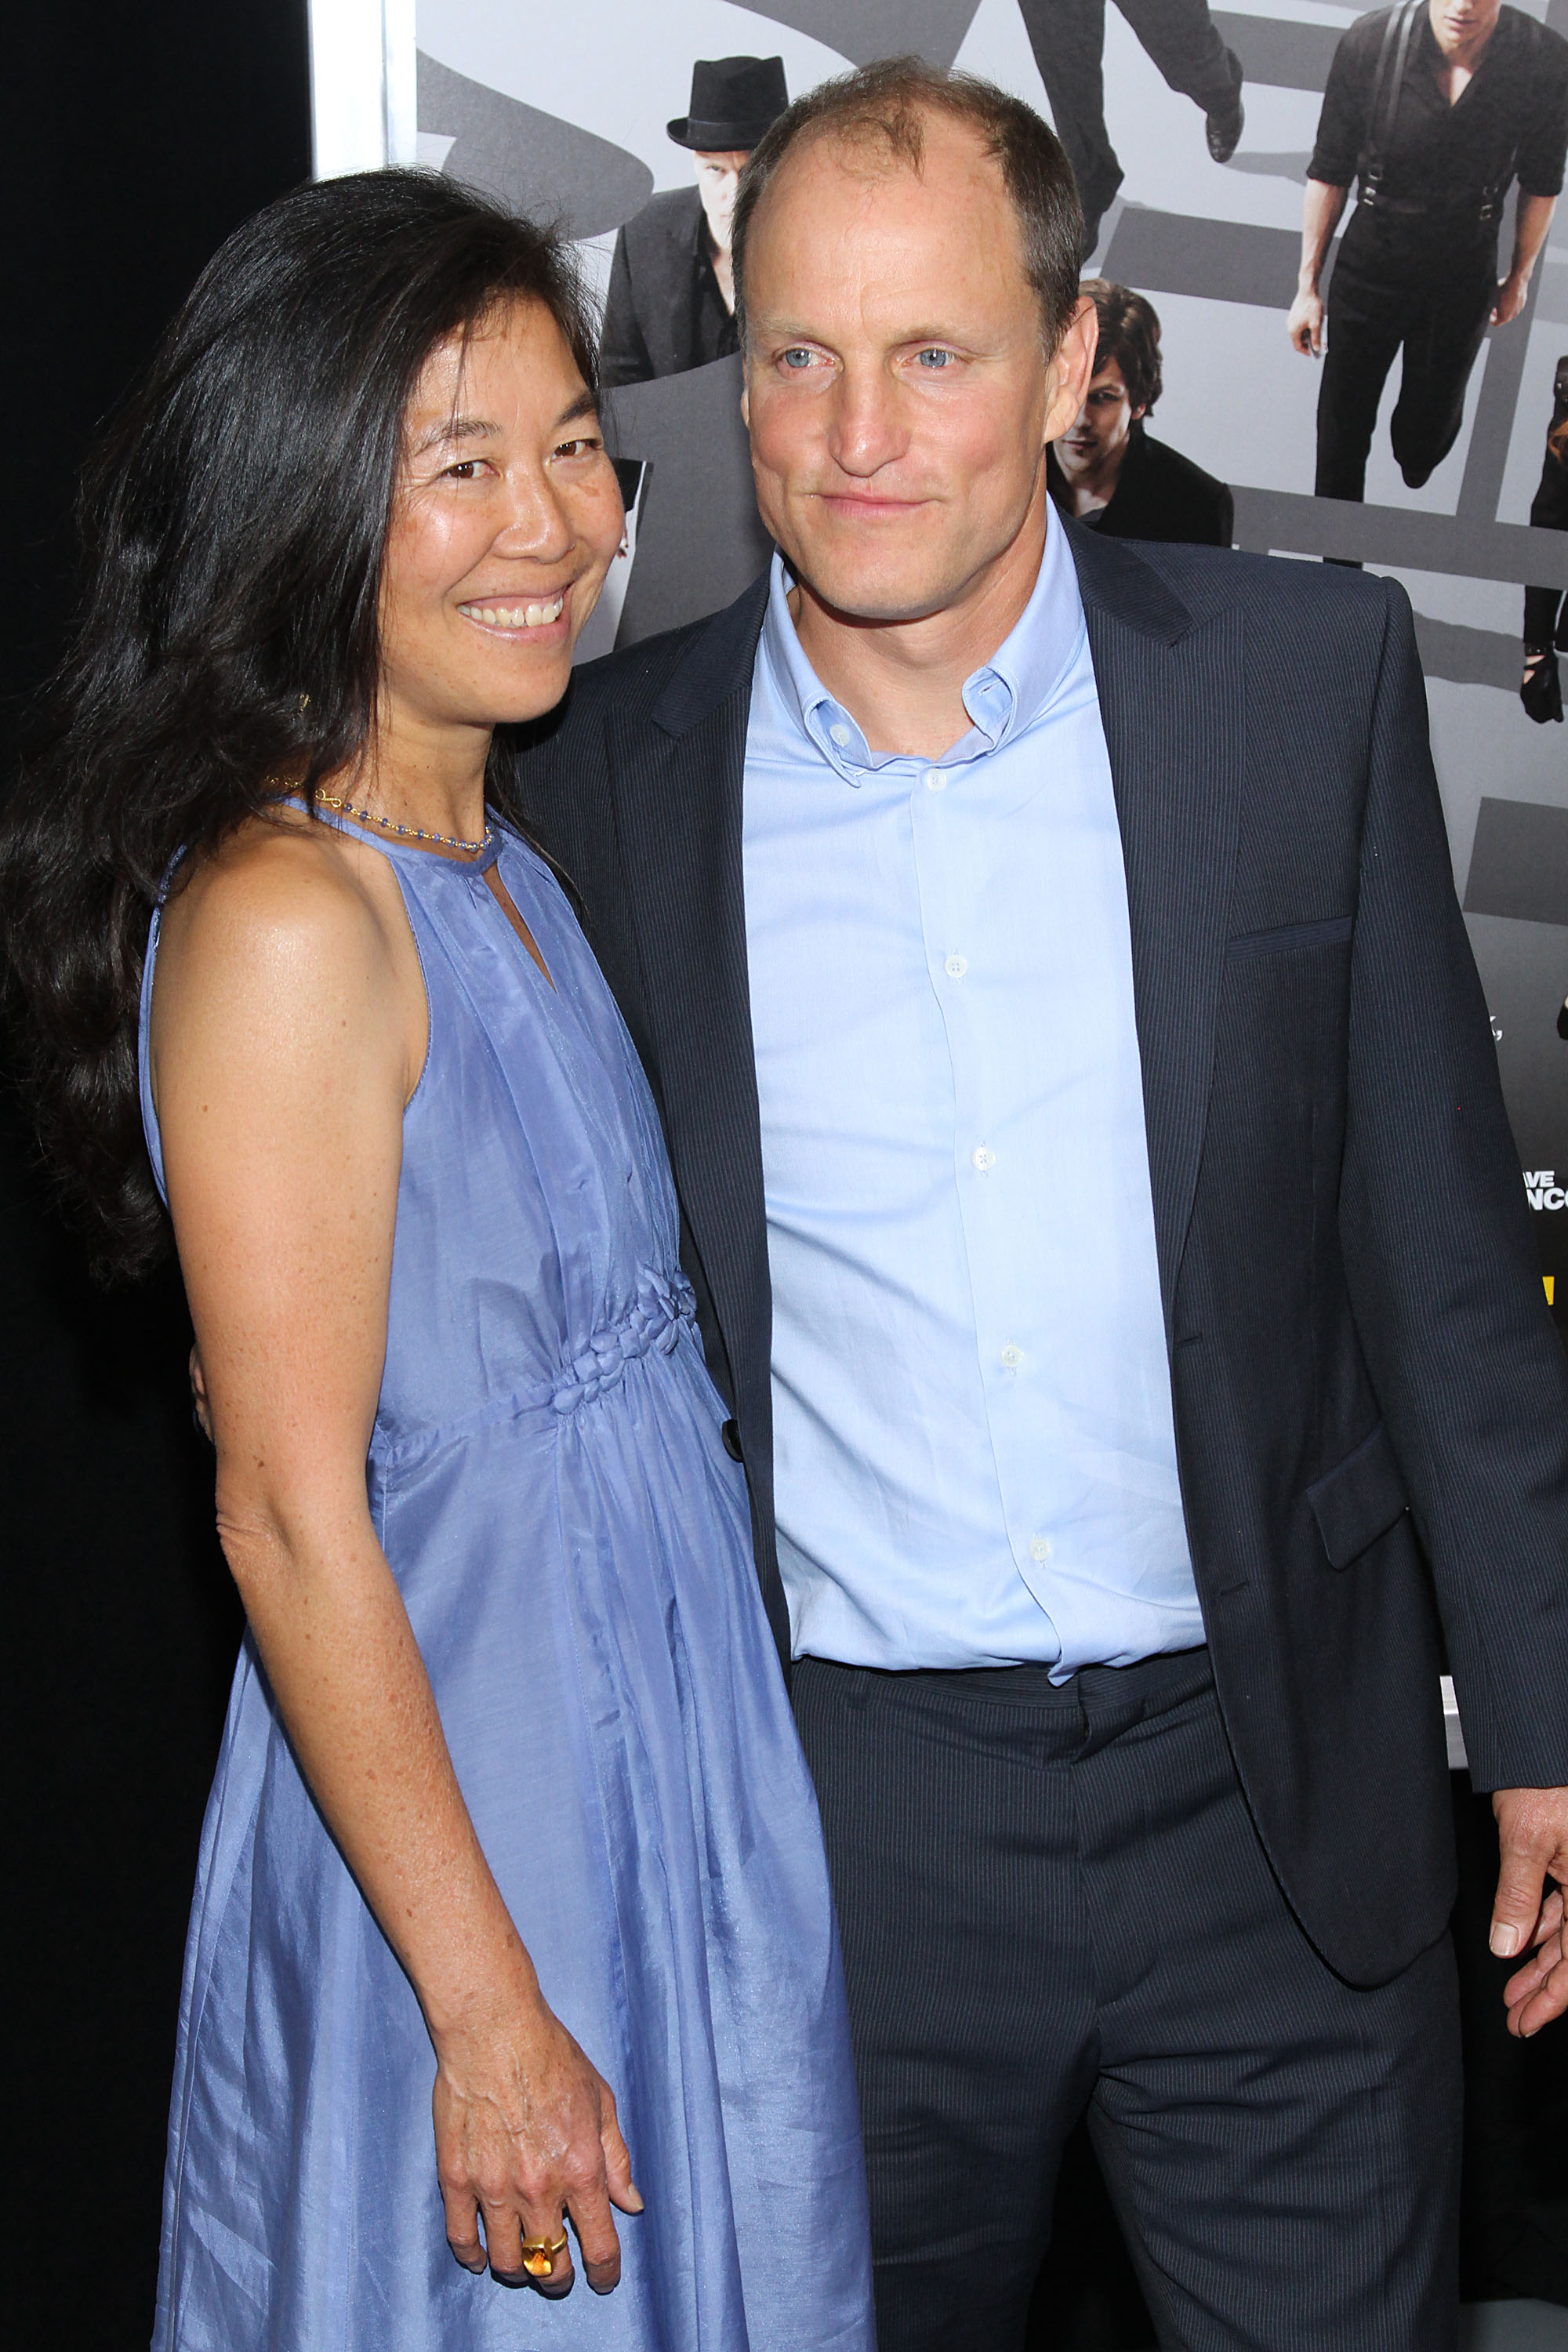 Woody Harrelson und seine Frau Laura Louie besuchen die "Now You See Me" New York Premiere im AMC Lincoln Square Theater am 21. Mai 2013 in New York City. | Quelle: Getty Images